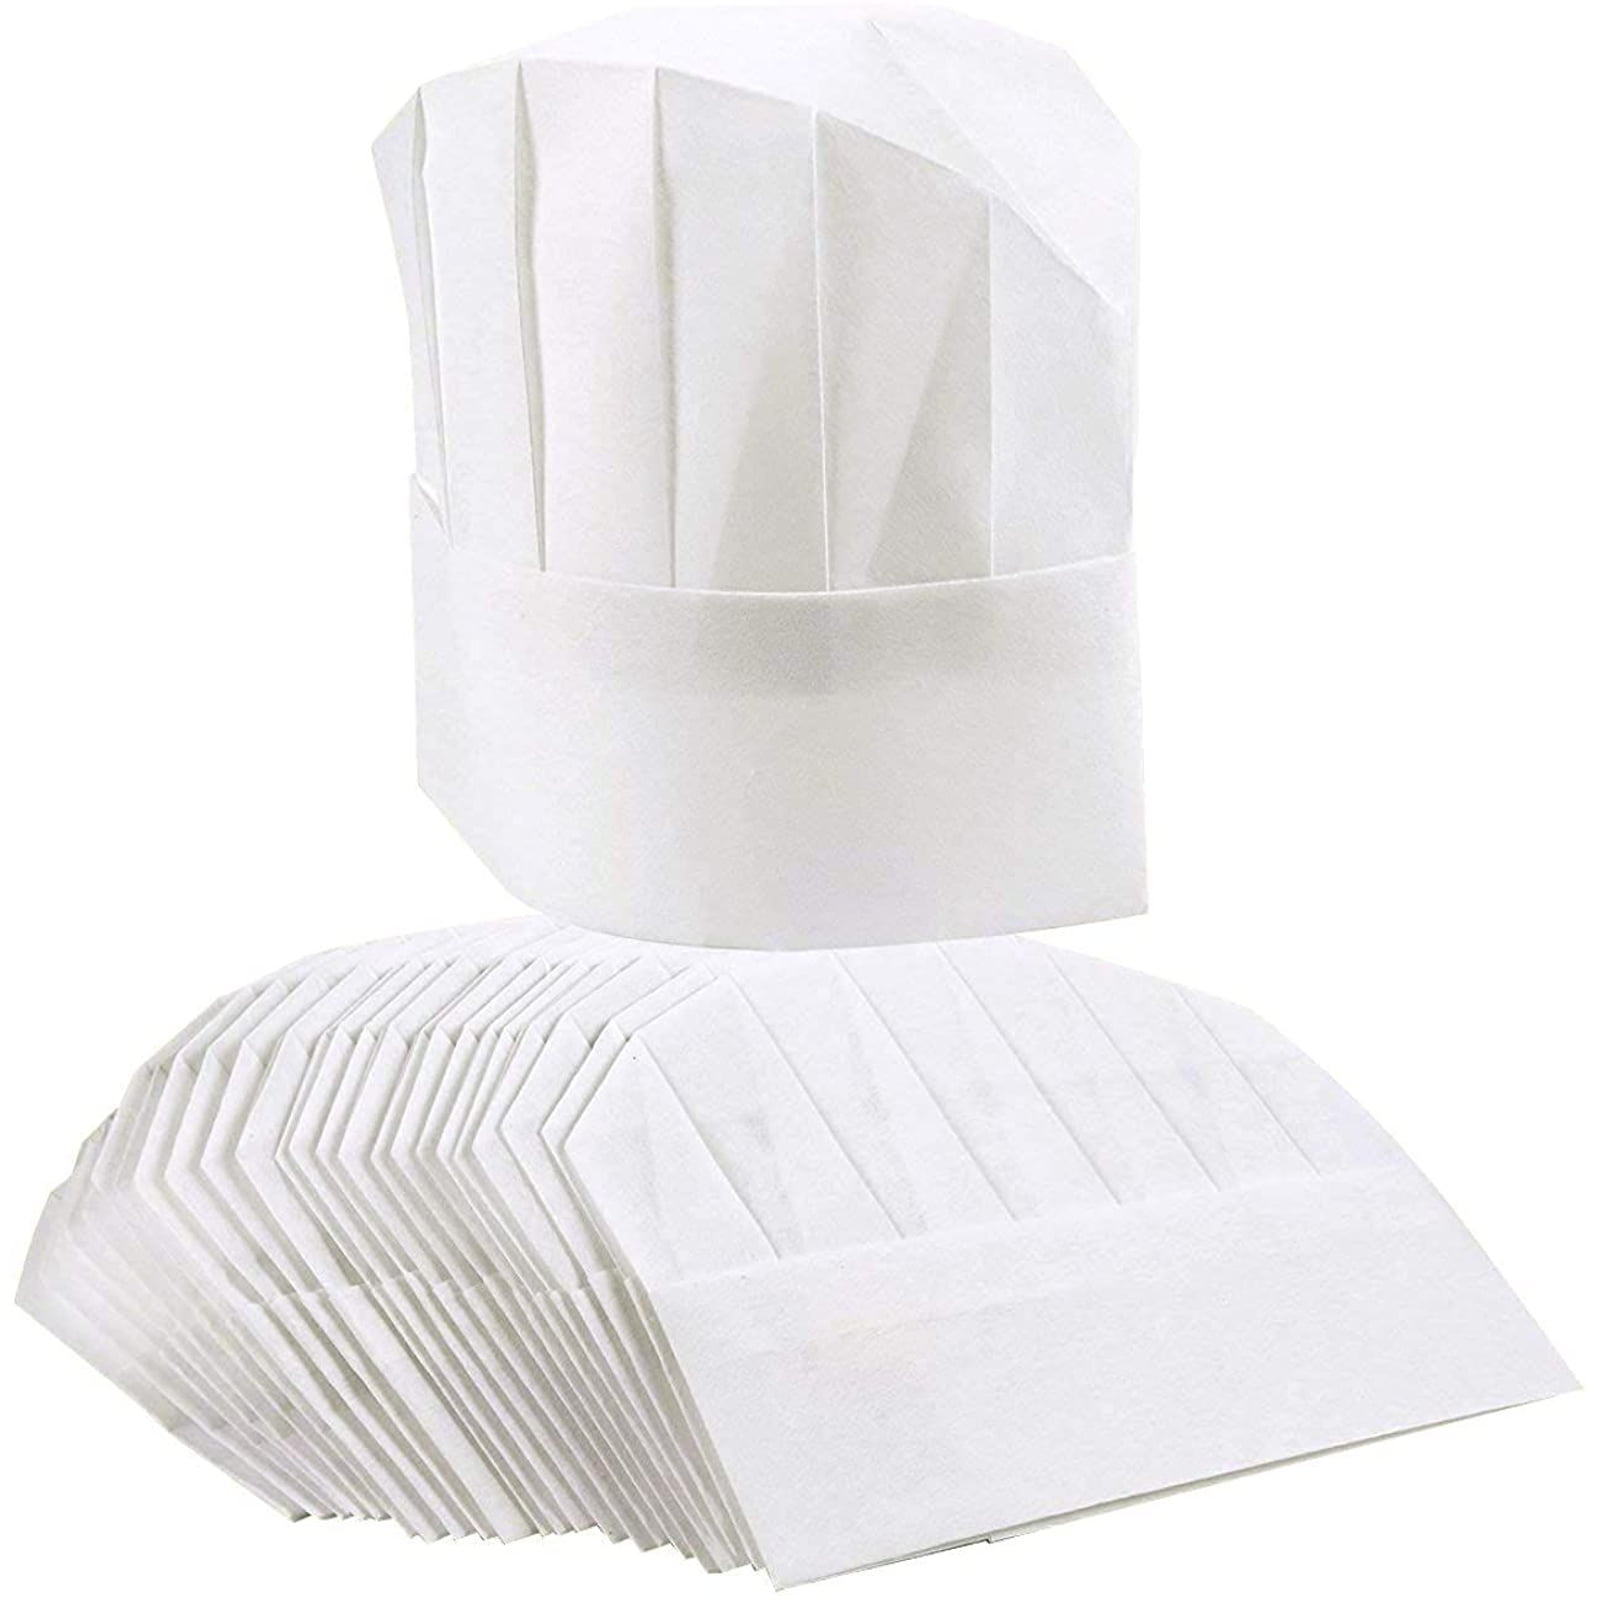 10 x Chef Hats White Paper Disposable 11.5"  29cm Adjustable One Size Fits All 